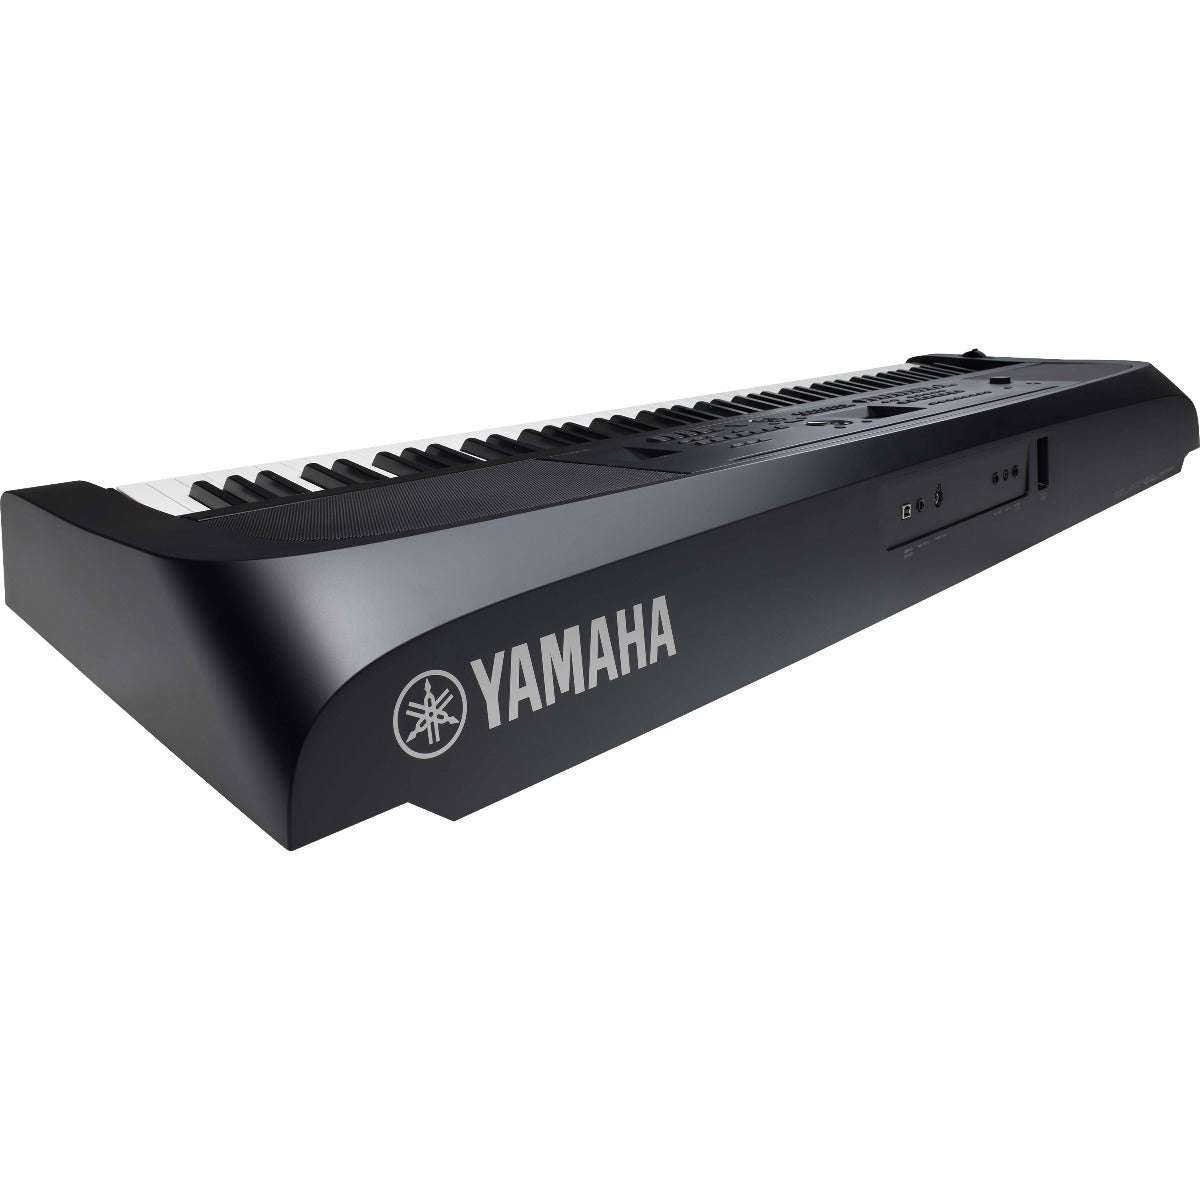 3/4 view of Yamaha DGX-670 Portable Grand Digital Piano - Black showing rear, top and right side